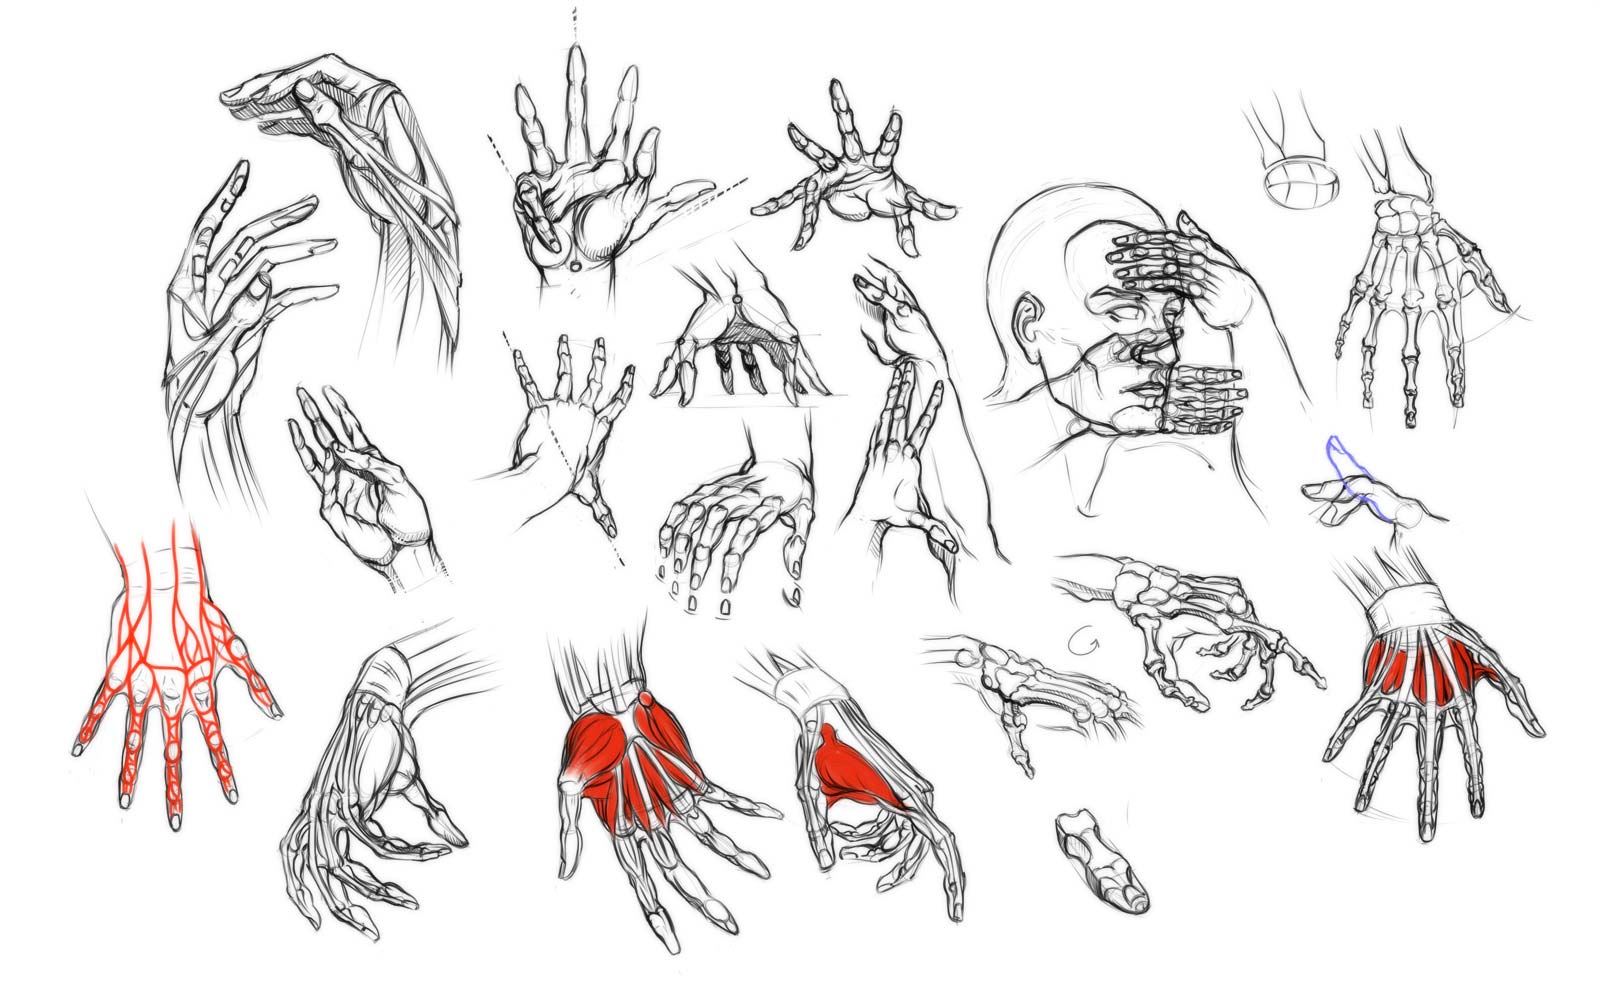 Hands drawing reference